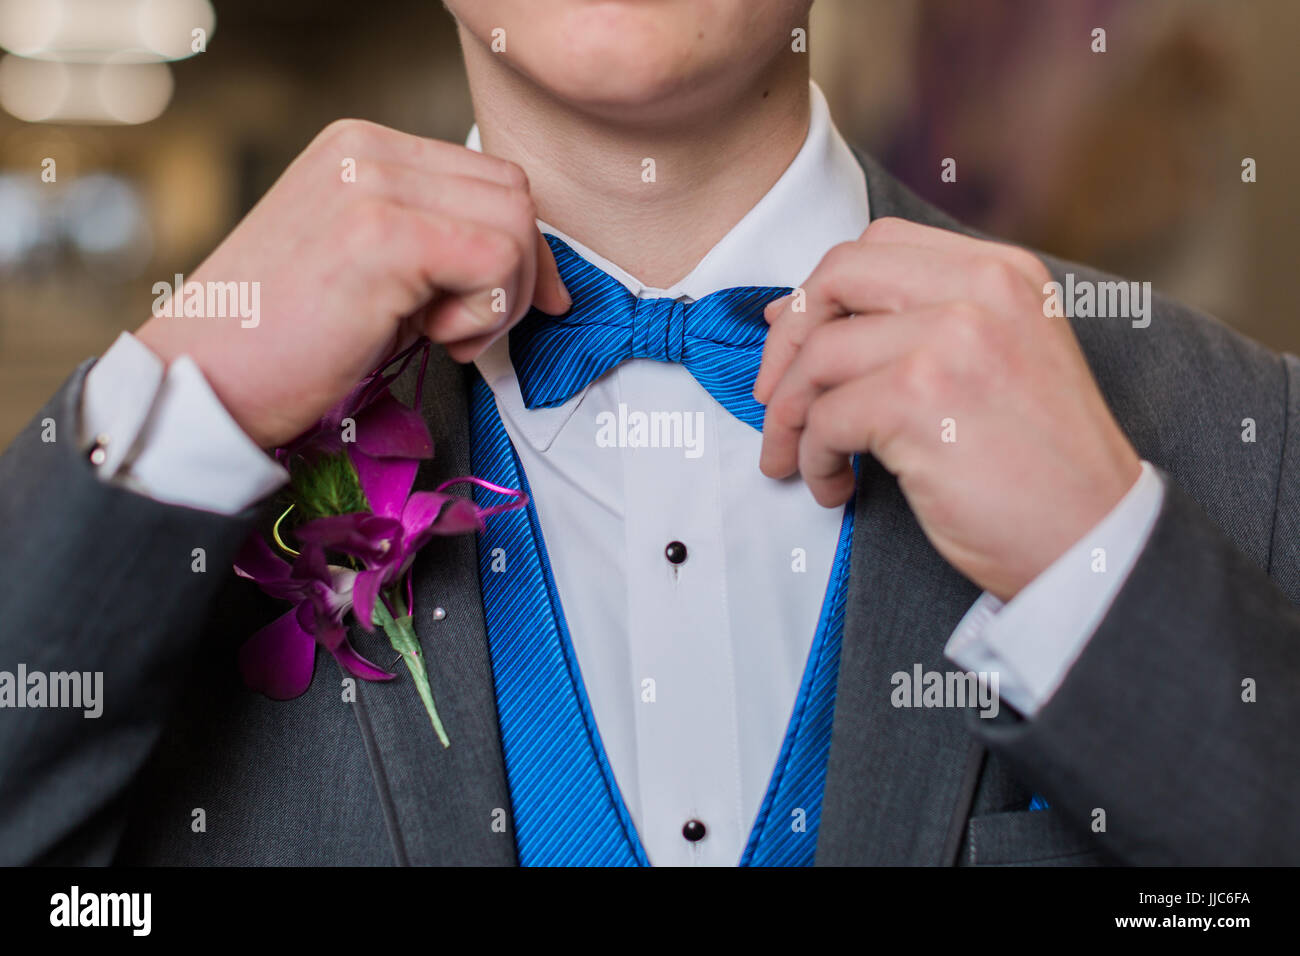 One teen boy adjusts blue striped bow tie. Getting dressed and ready for formal high school prom dance. Stock Photo